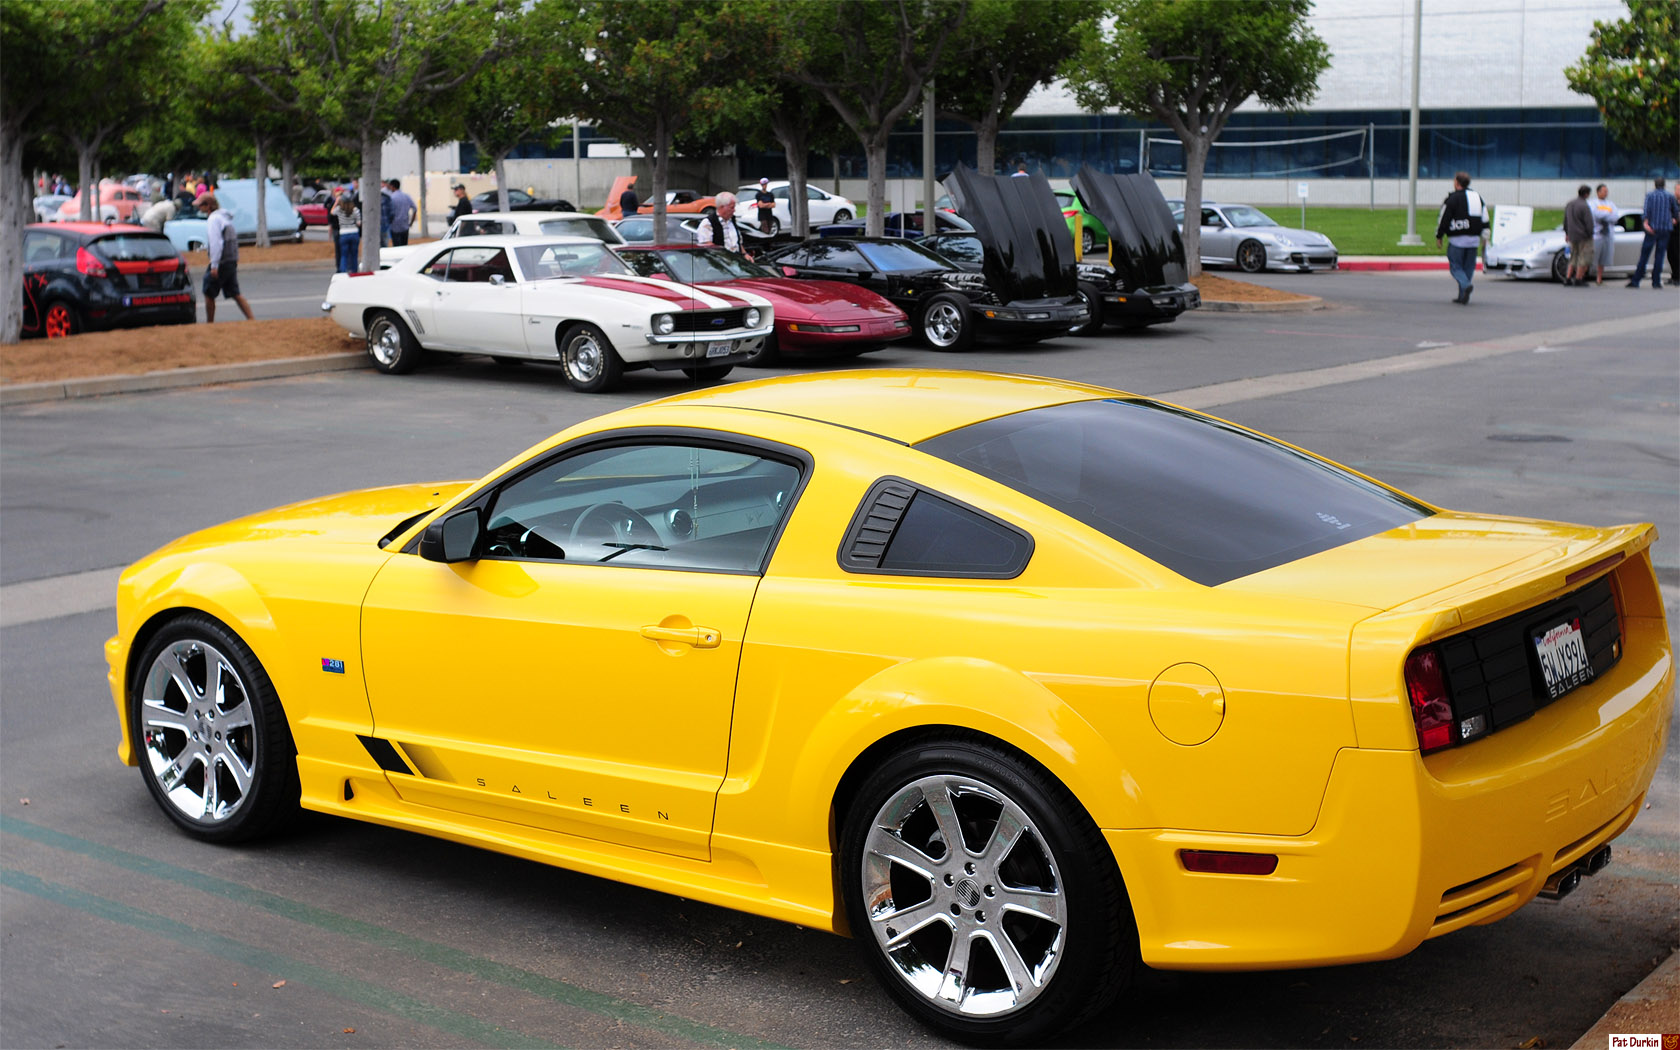 2005 Ford saleen extreme #7.